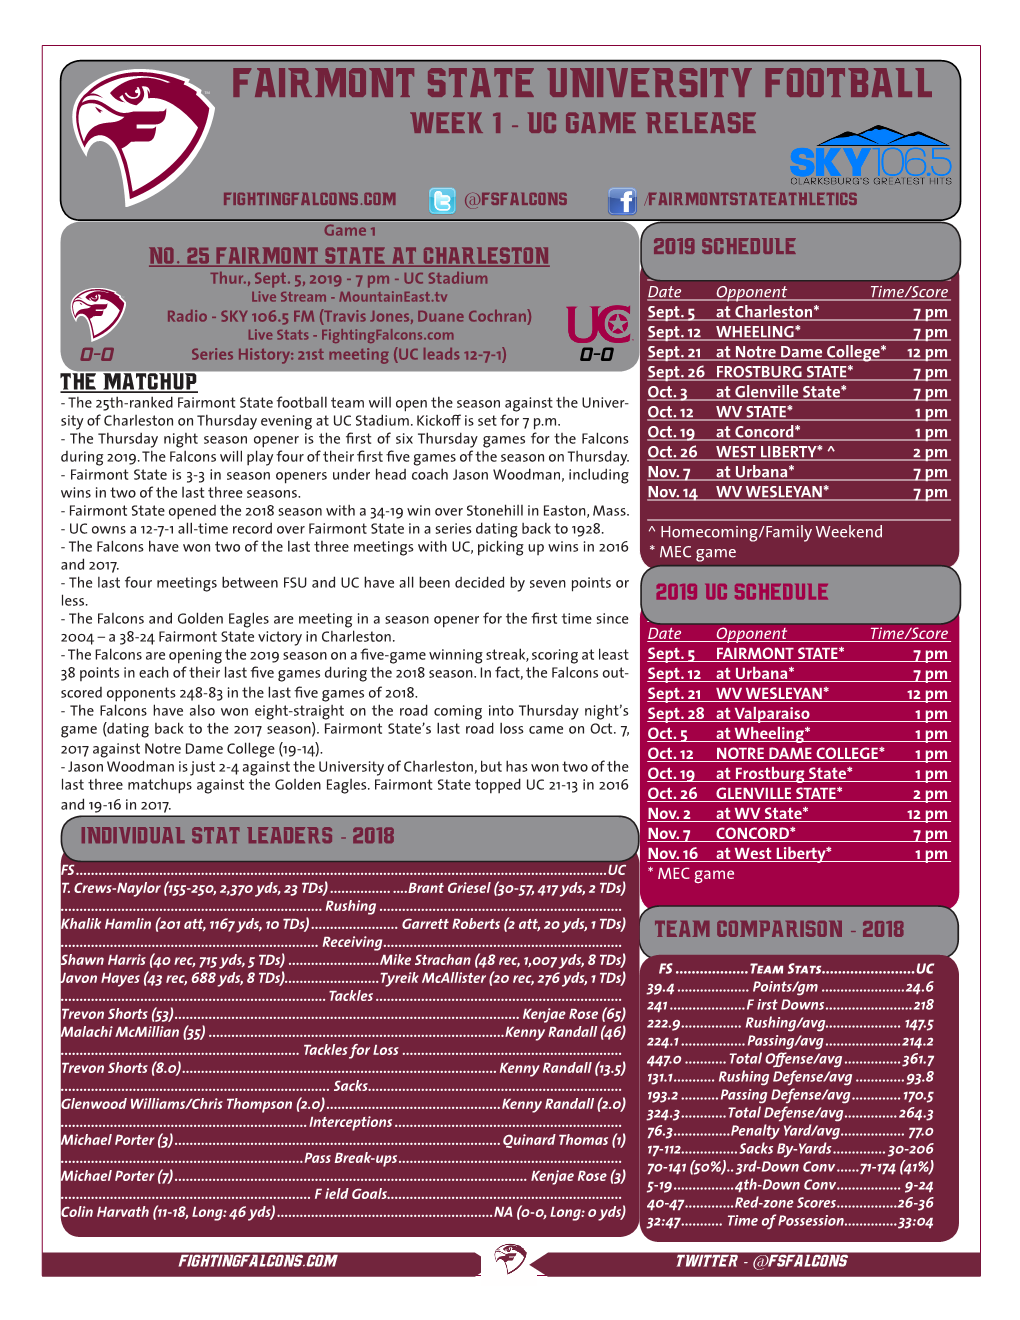 Fairmont State University Football Week 1 - UC Game Release